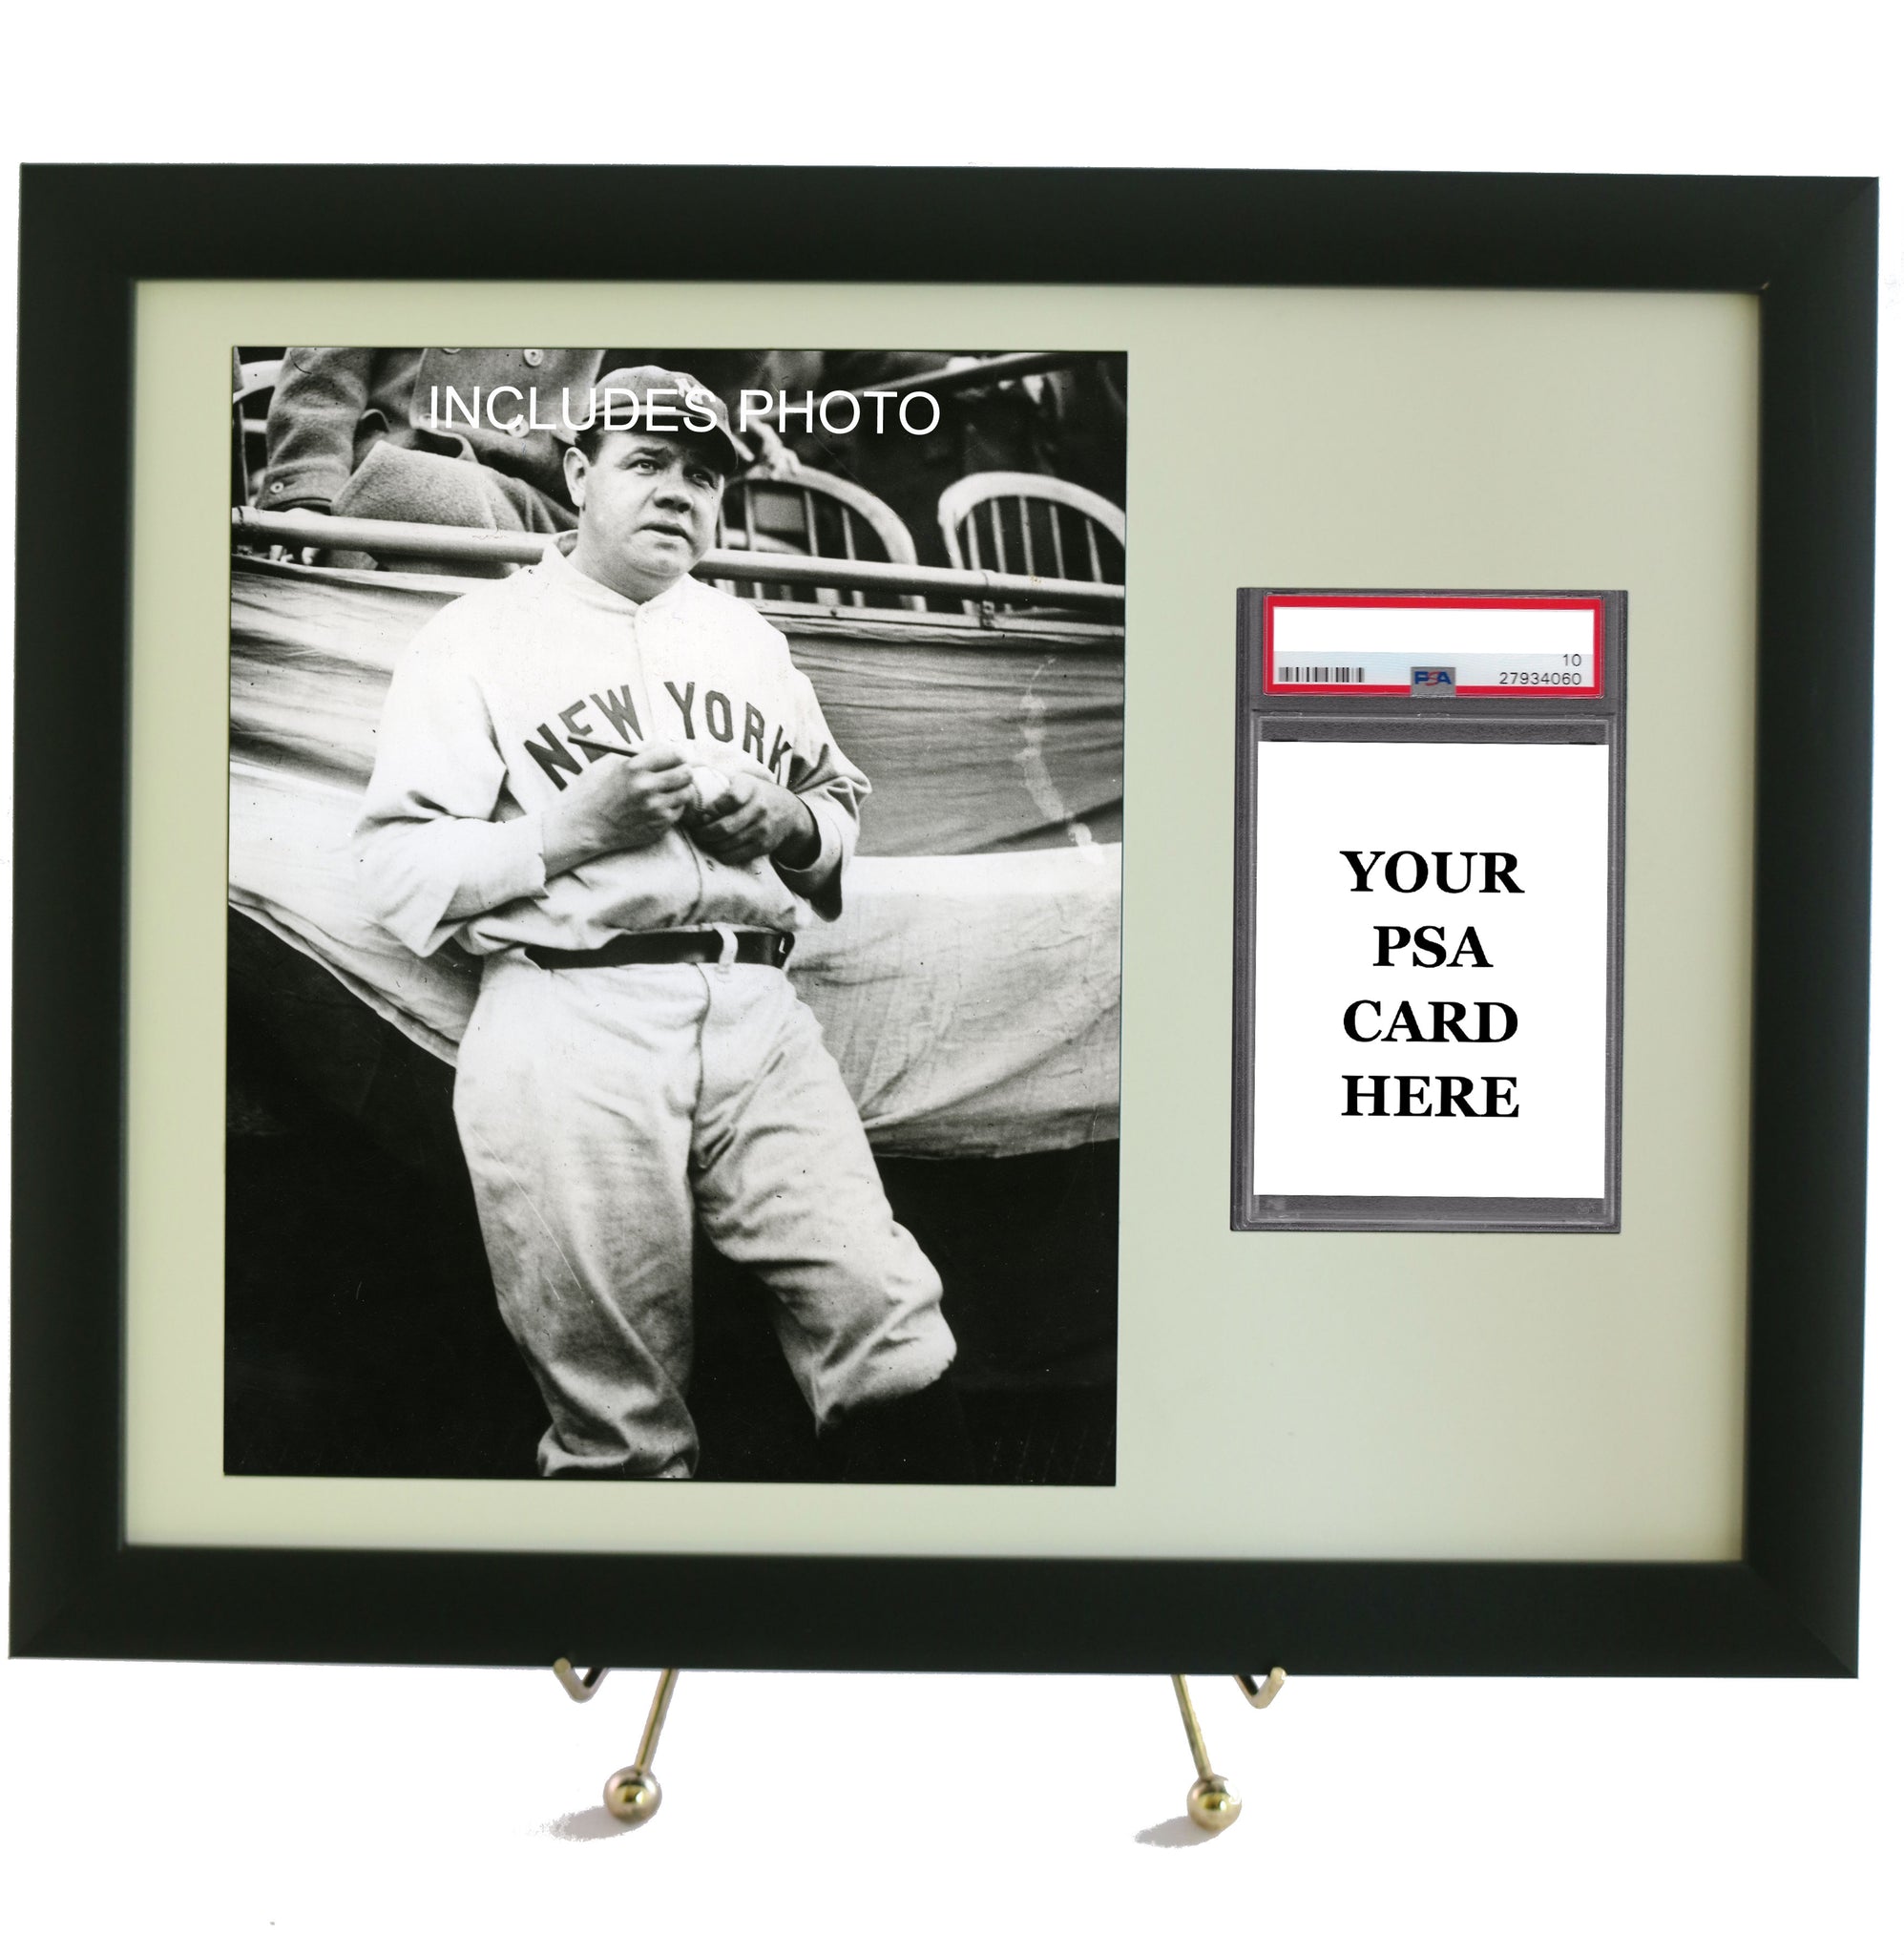 Sports Card Frame for YOUR PSA Graded Babe Ruth Card (INCLUDES PHOTO)